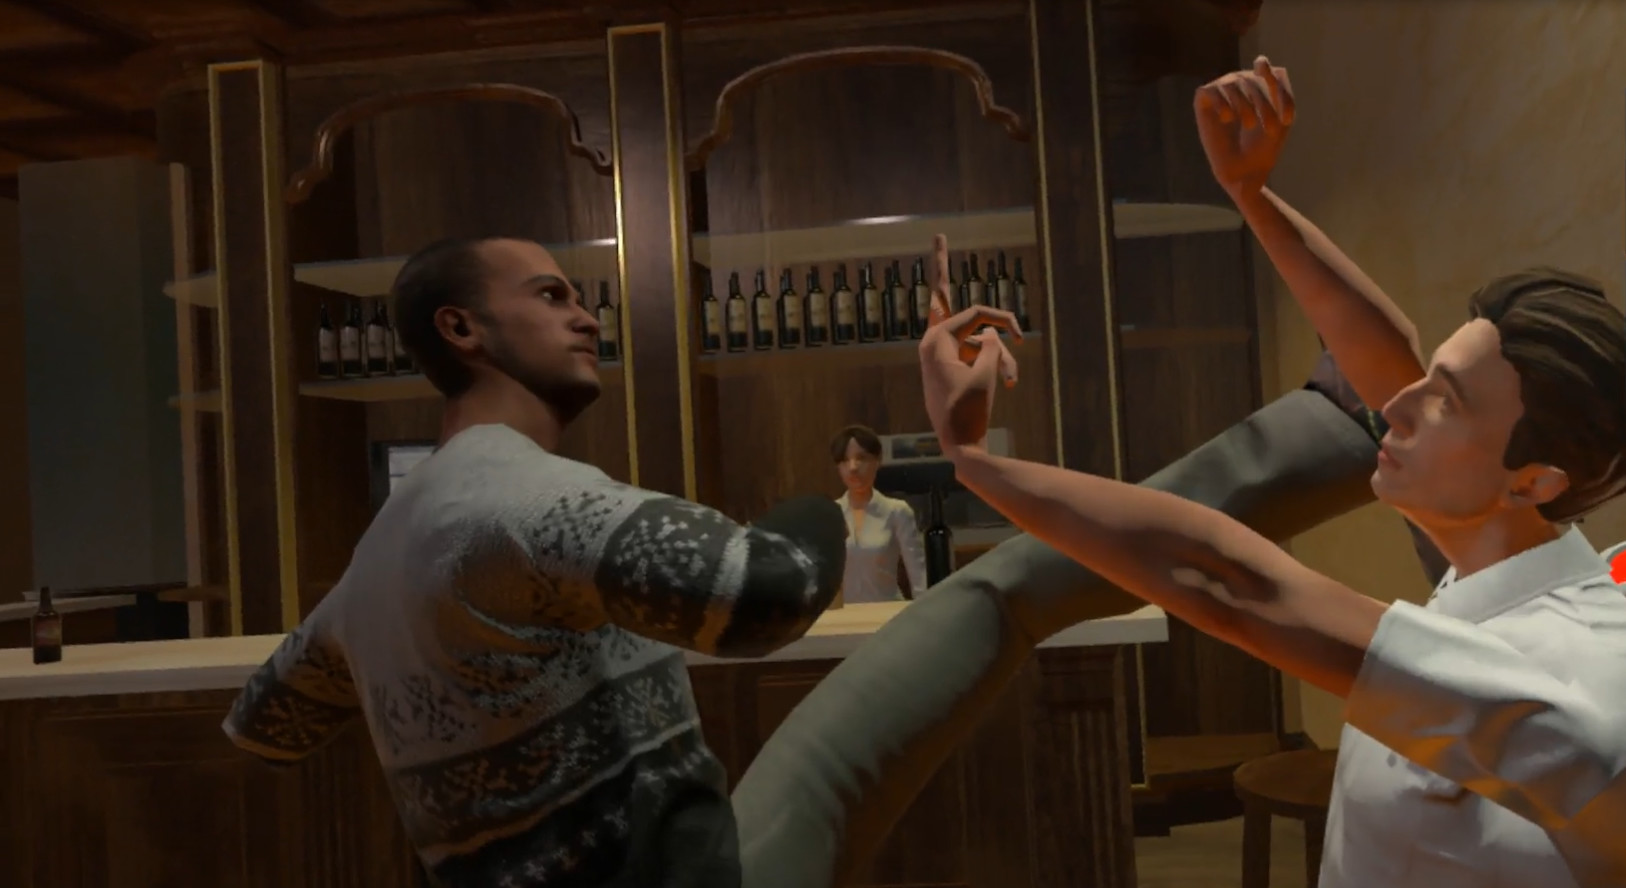 Drunkn Bar Fight Is Looking At A Physical Release In Europe For A Unique Fighting VR Experience